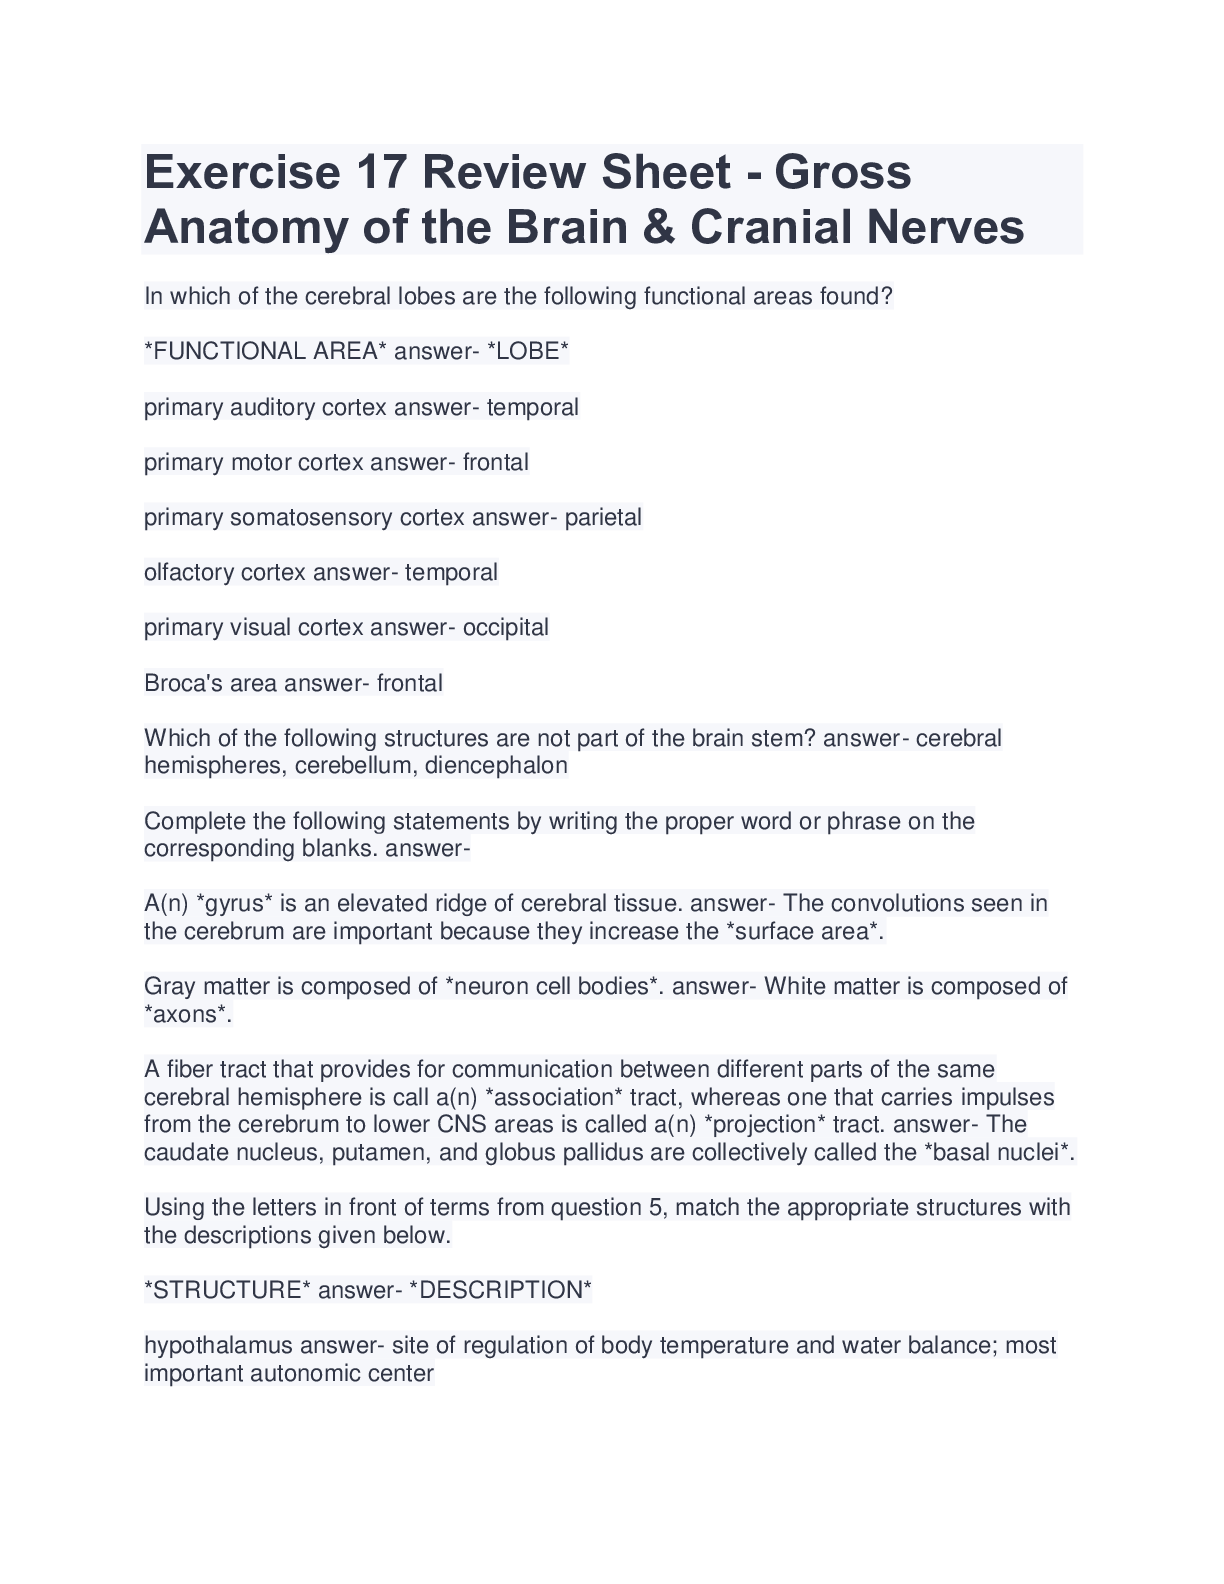 Exercise Review Sheet Gross Anatomy Of The Brain Cranial Nerves